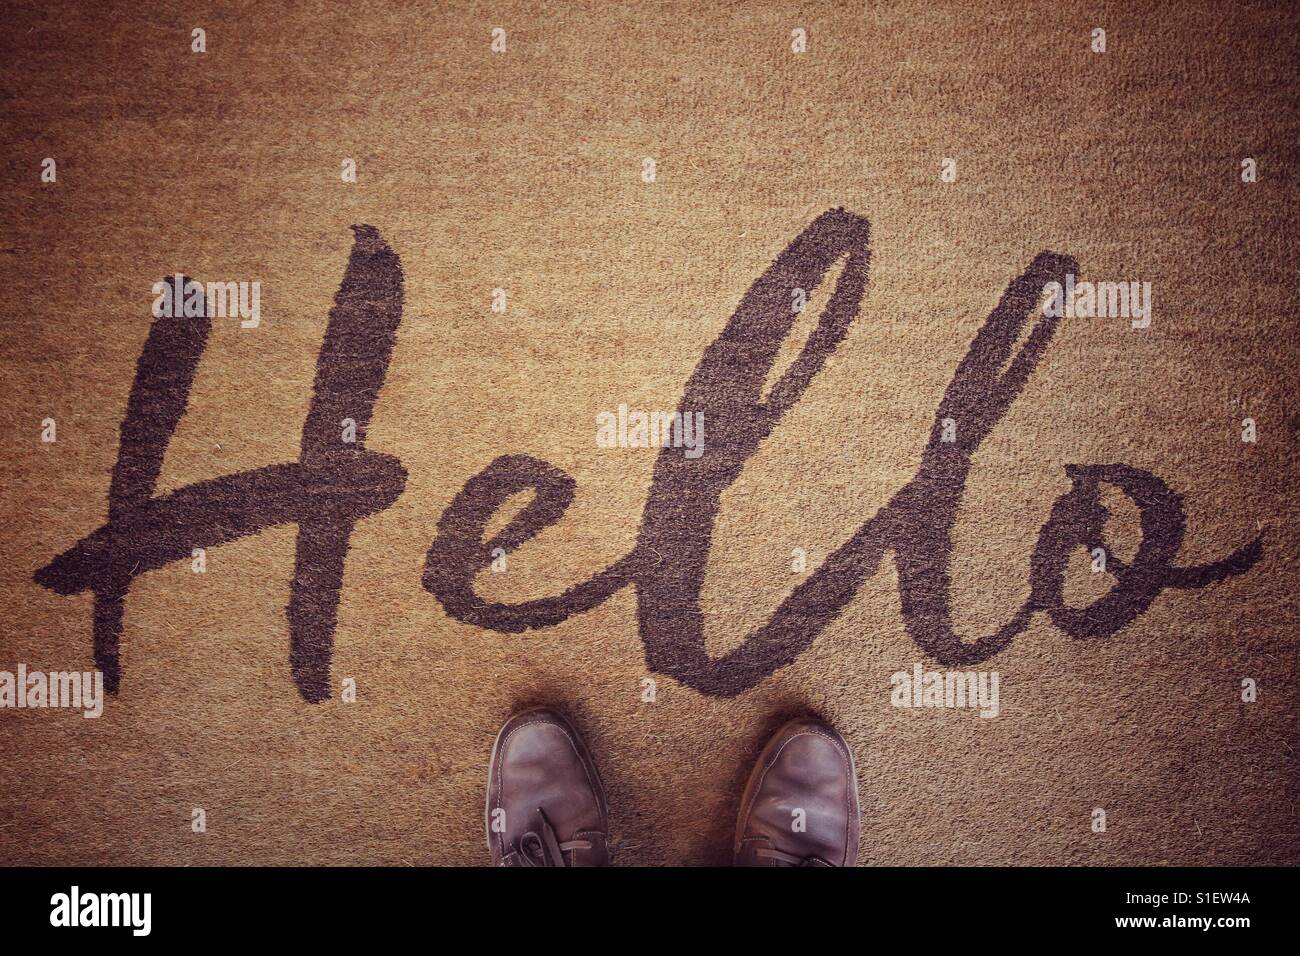 Looking down from above onto a pair of shoes that are stood on a welcome mat with the word hello written in elaborate script. Stock Photo